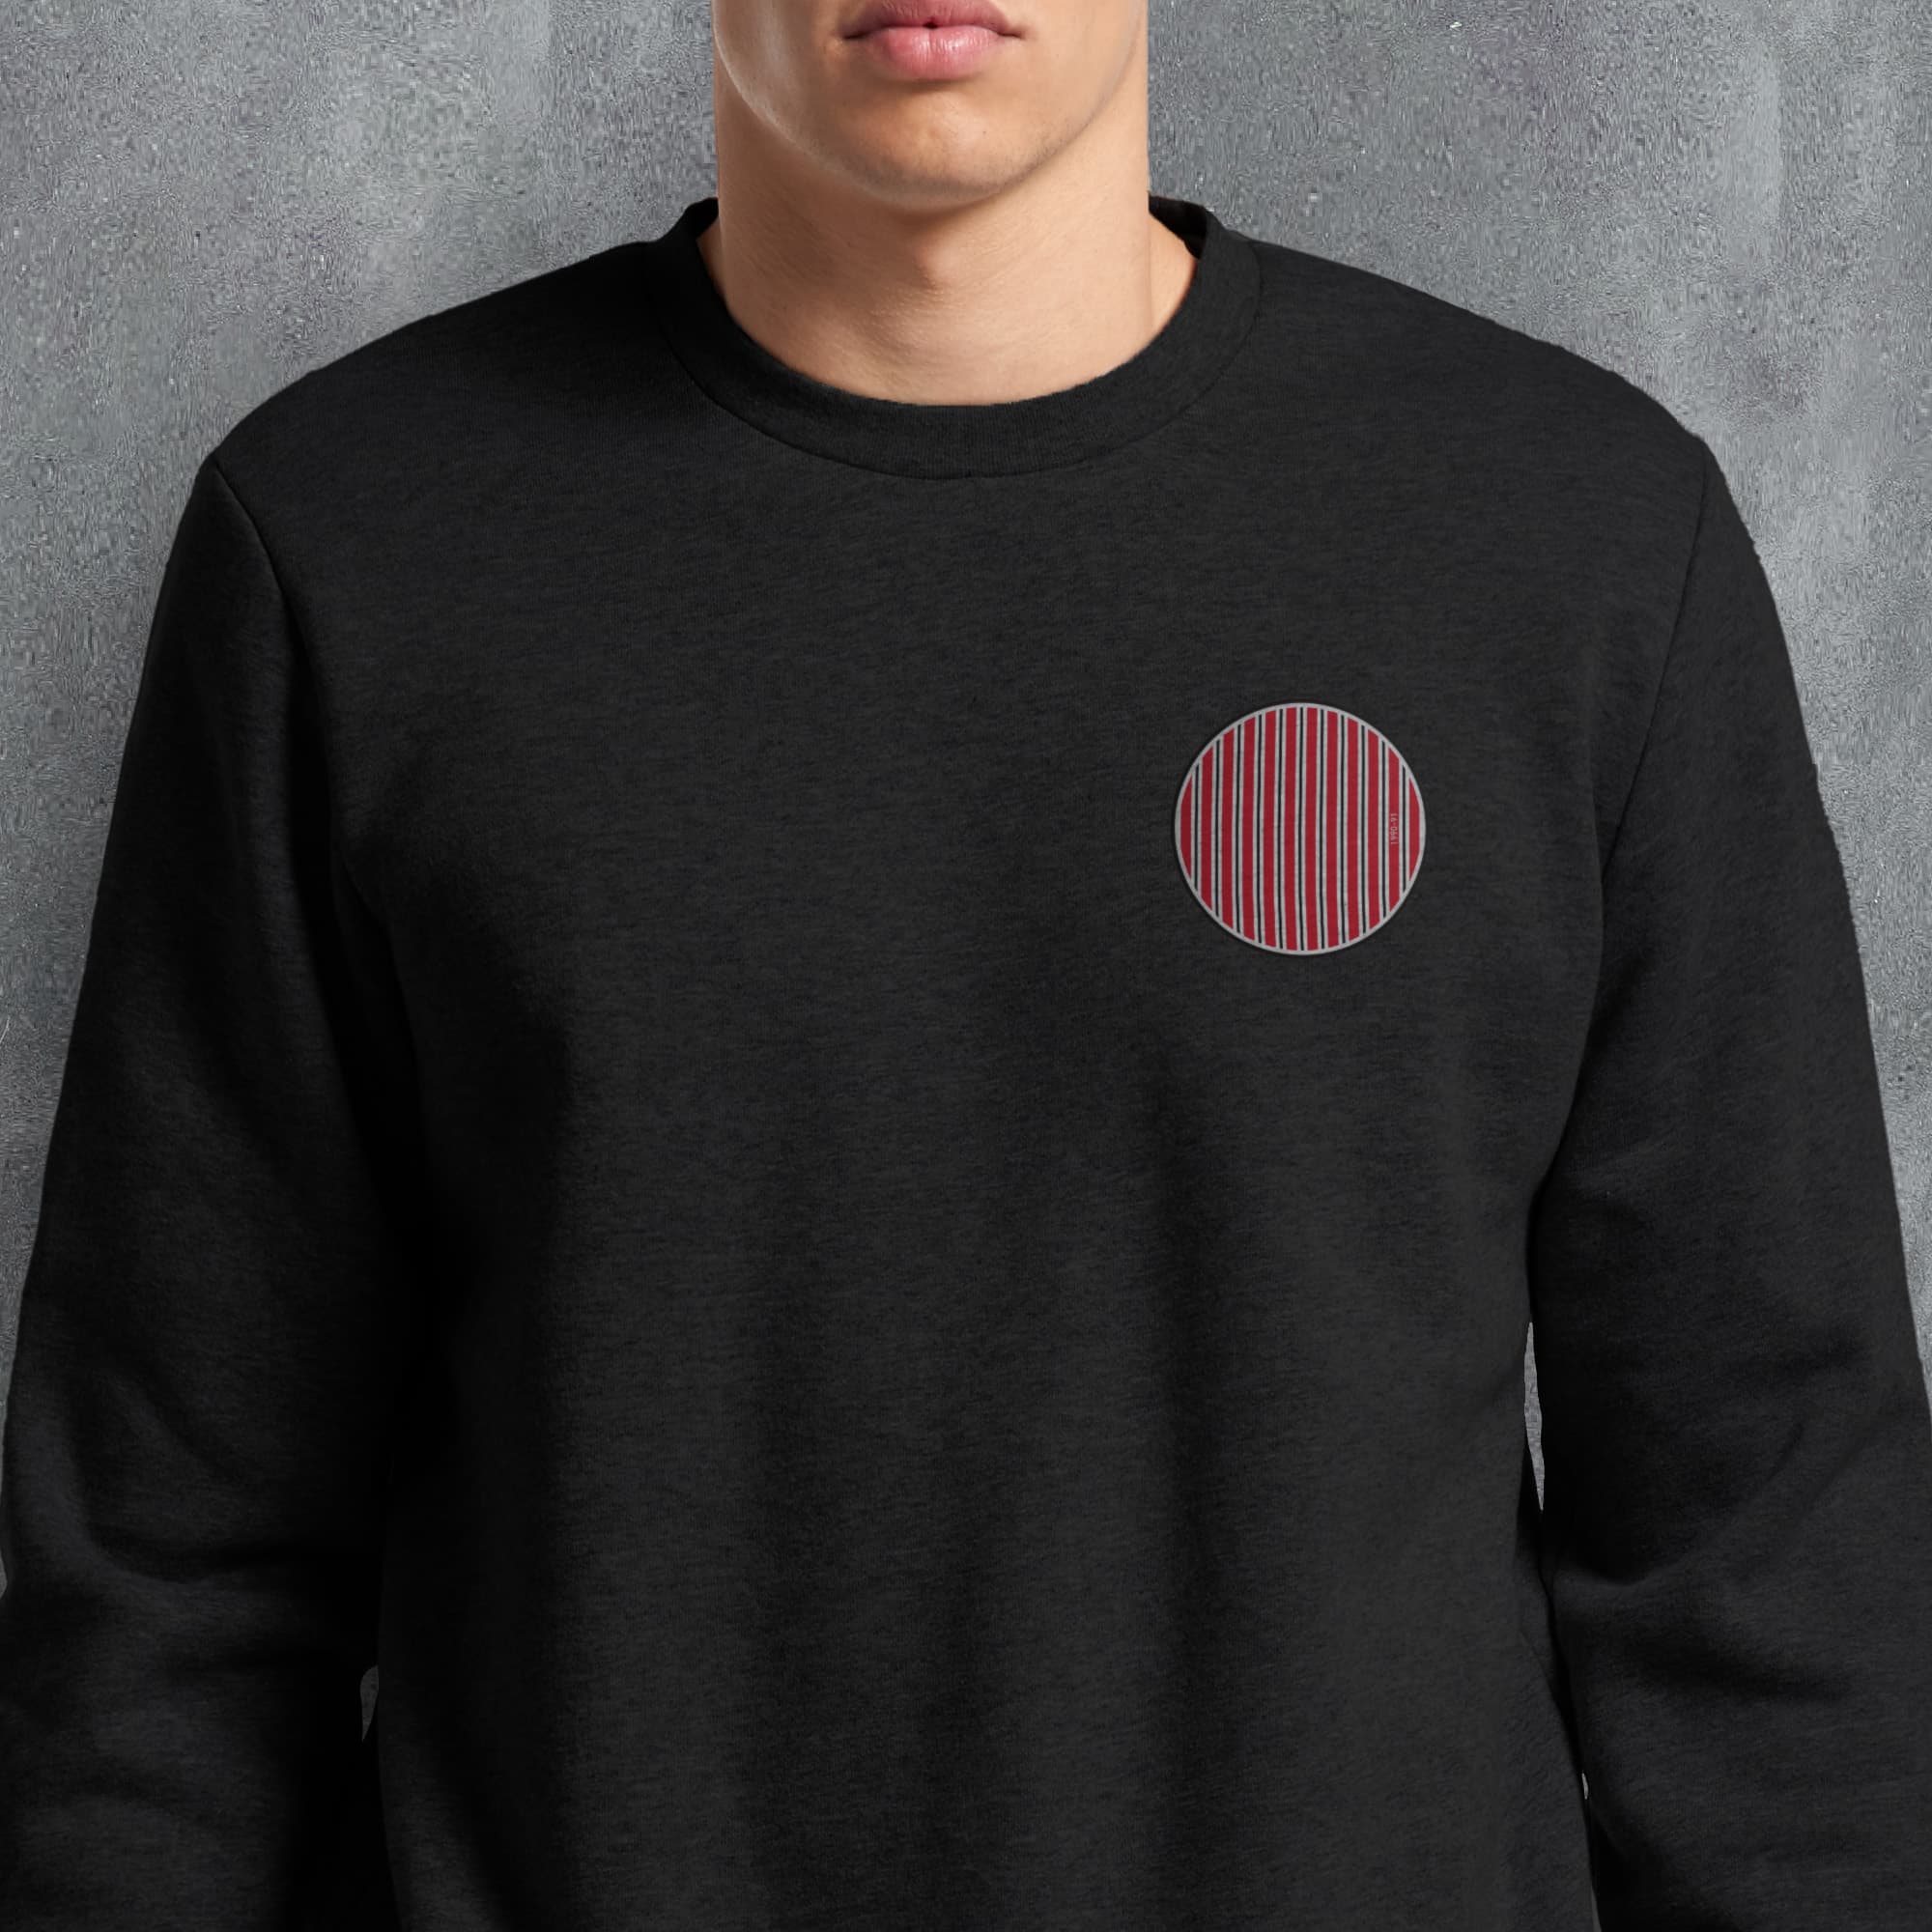 a man wearing a black sweatshirt with a red circle on it